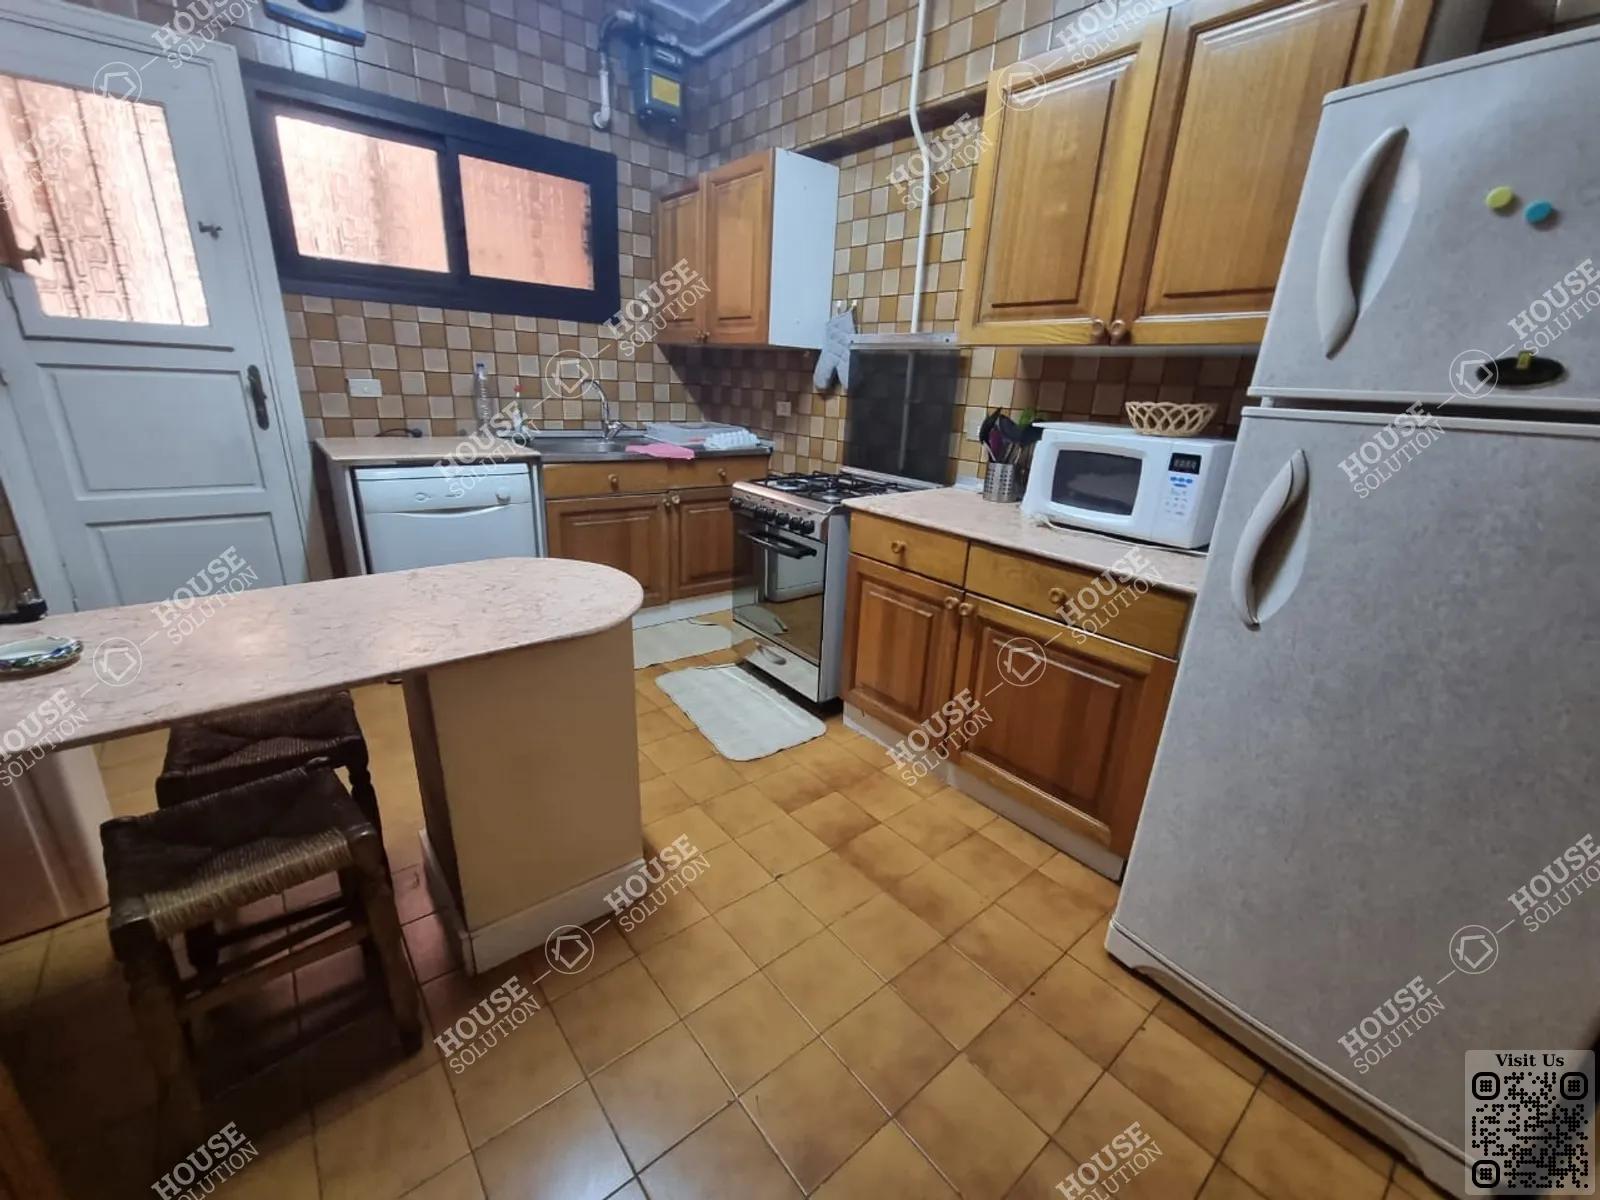 KITCHEN  @ Apartments For Rent In Maadi Maadi Sarayat Area: 180 m² consists of 3 Bedrooms 3 Bathrooms Furnished 5 stars #3442-2